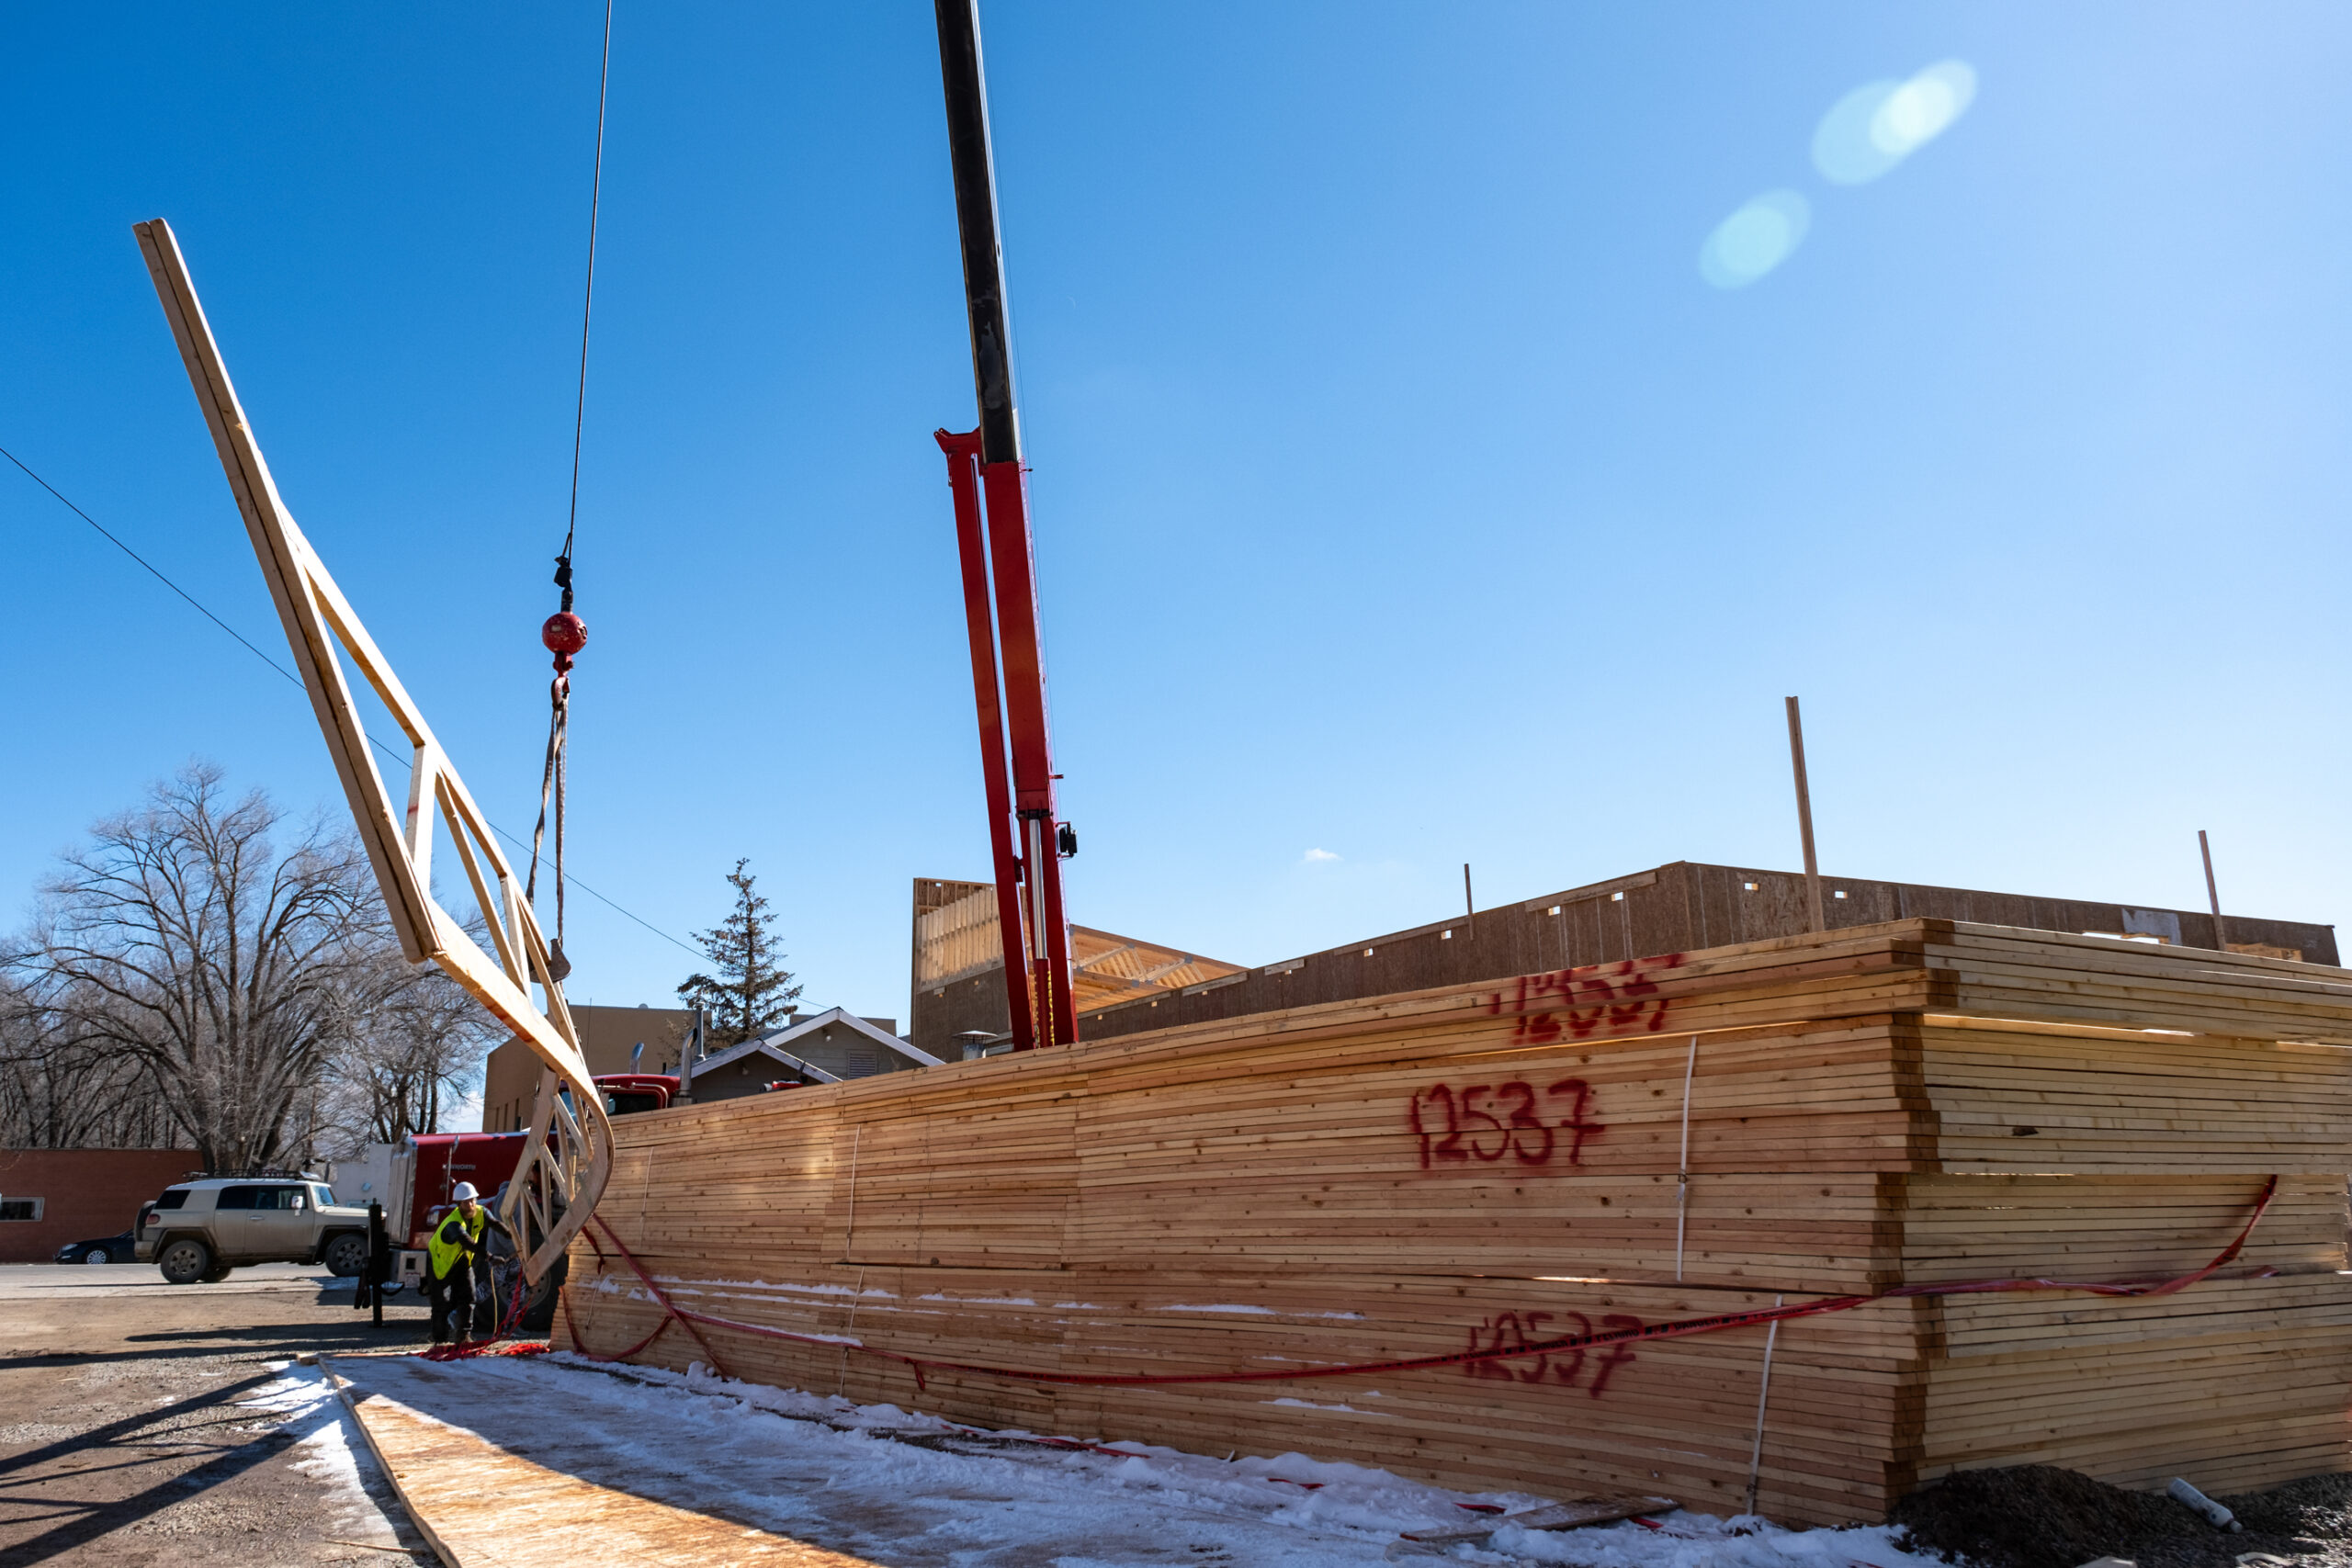 Sherman Construction works in tandem with Head Crane service out of Bayfield, Colo. to set trusses on Monday, Feb. 12 — rescheduled from the previous week due to winter weather conditions.